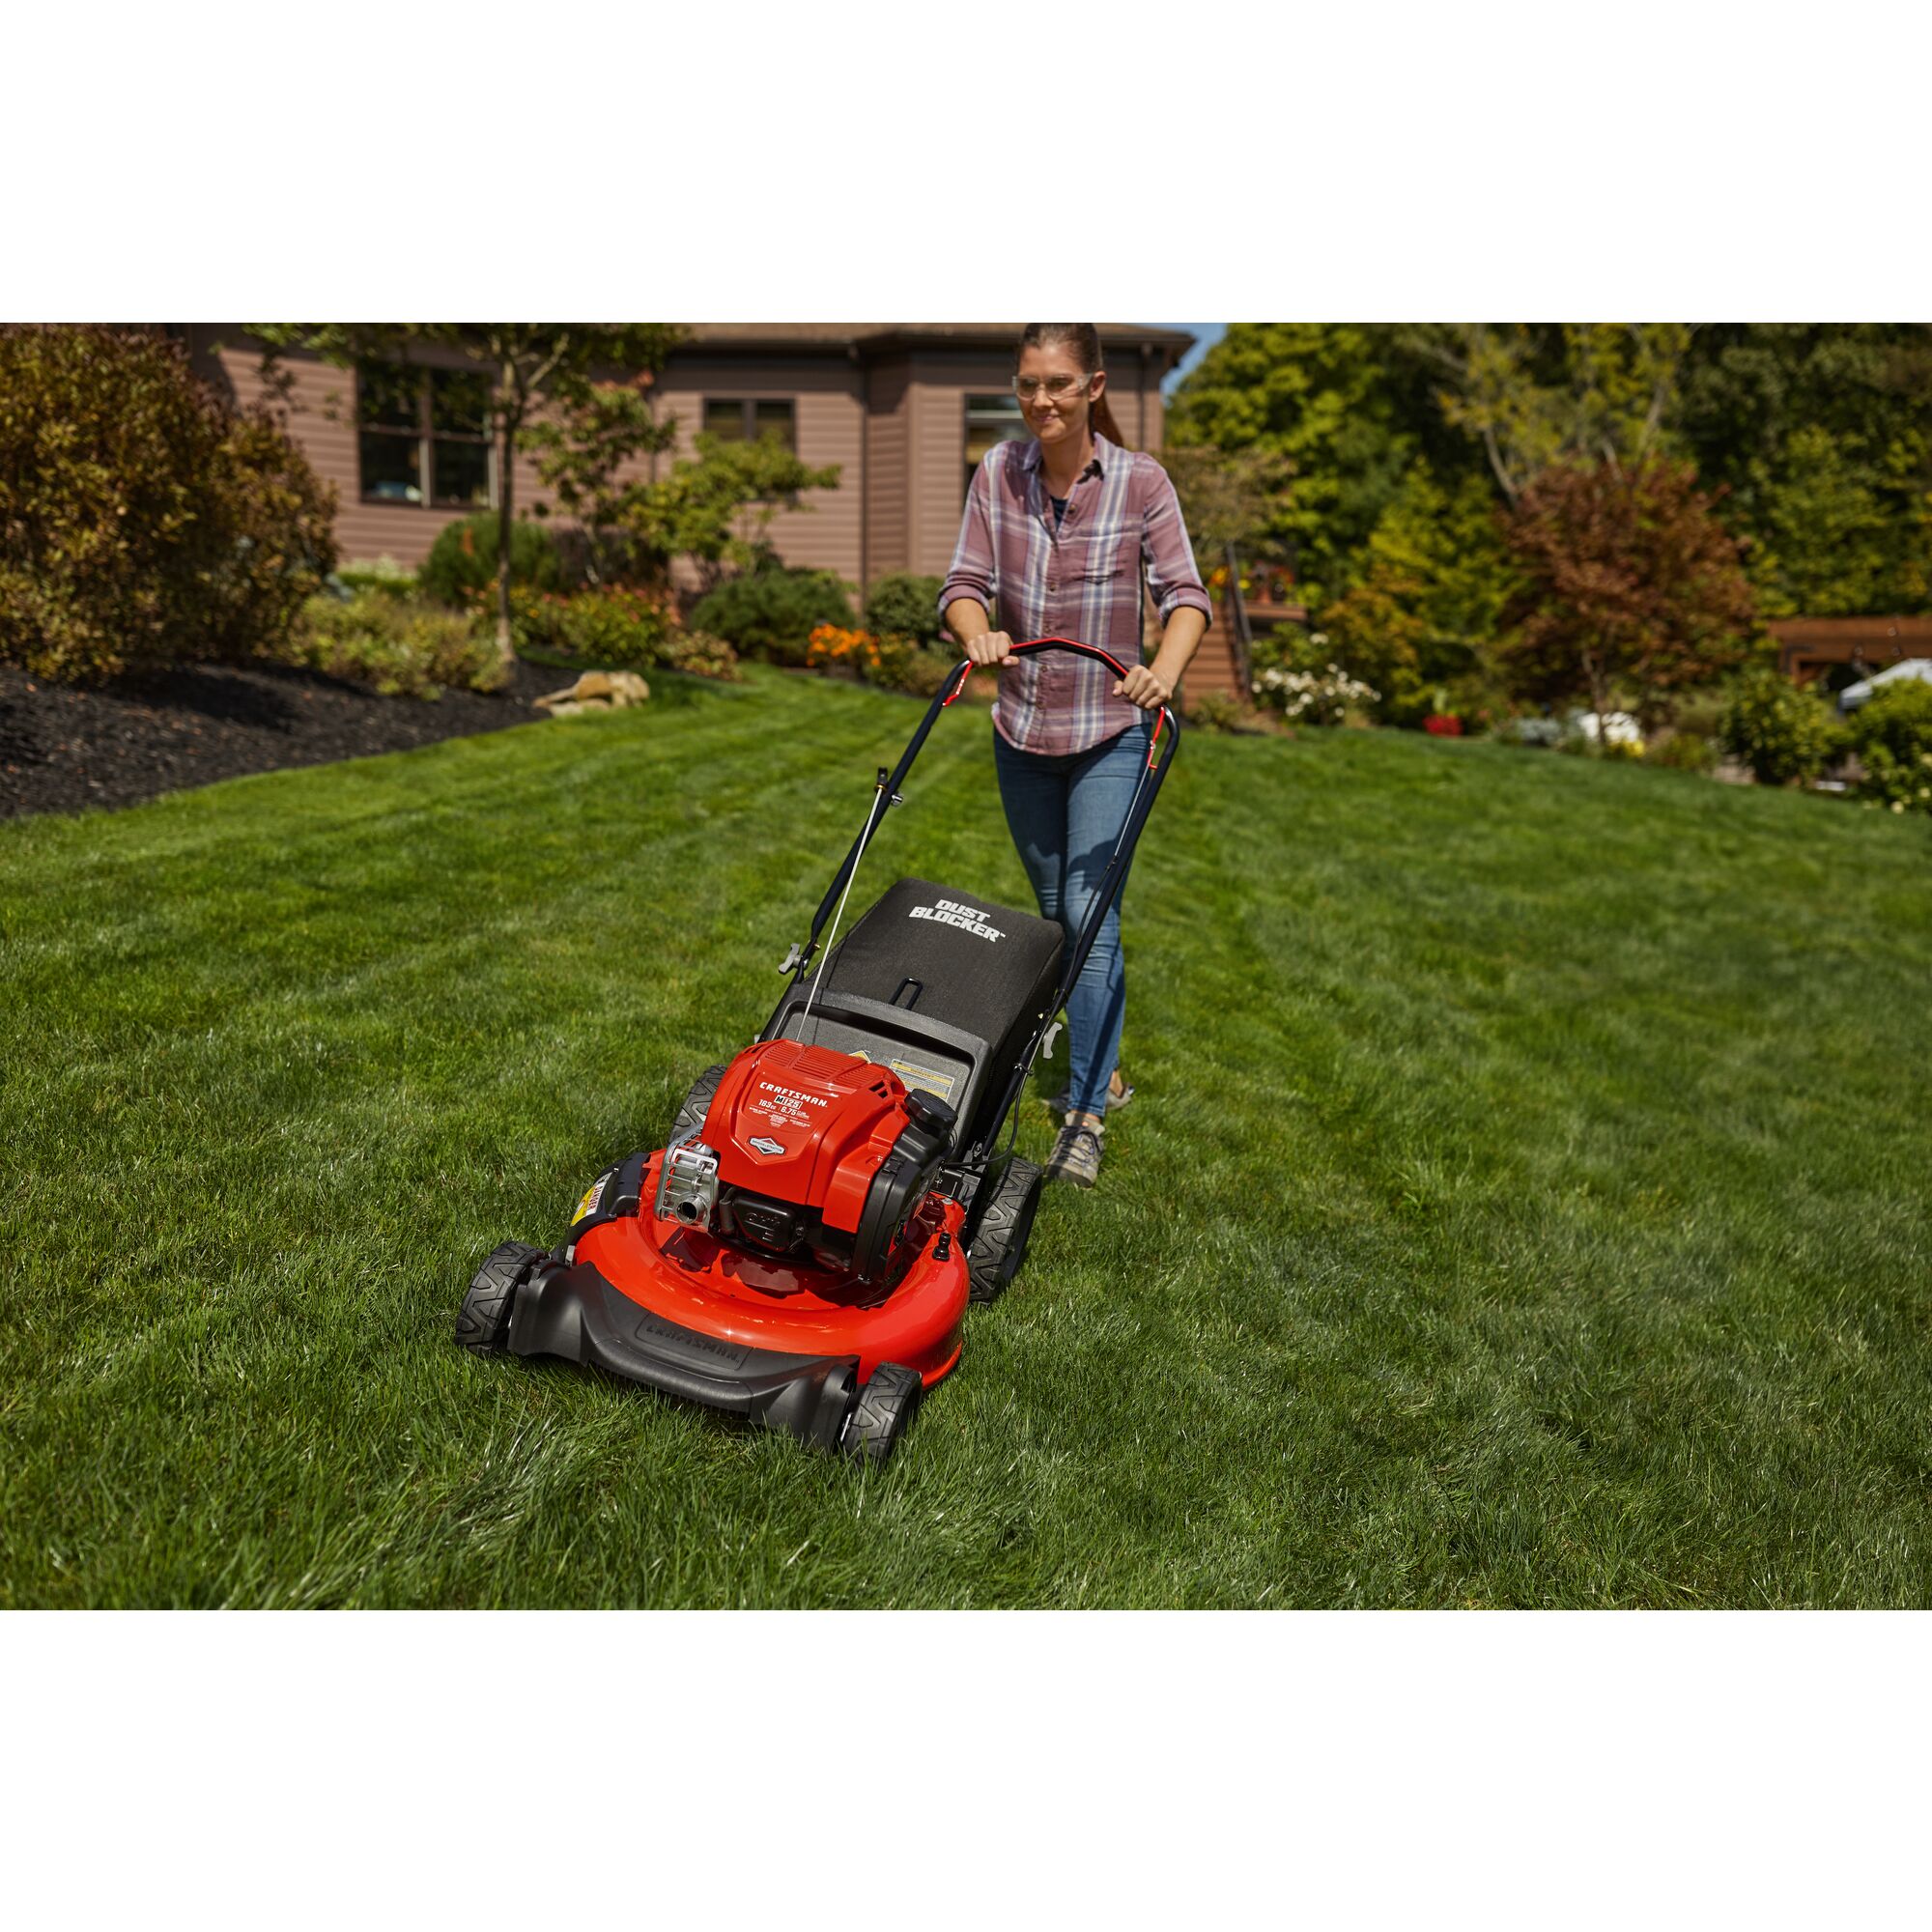 CRAFTSMAN M125 Push Mower mowing the grass in the backyard in front view in plaid shirt